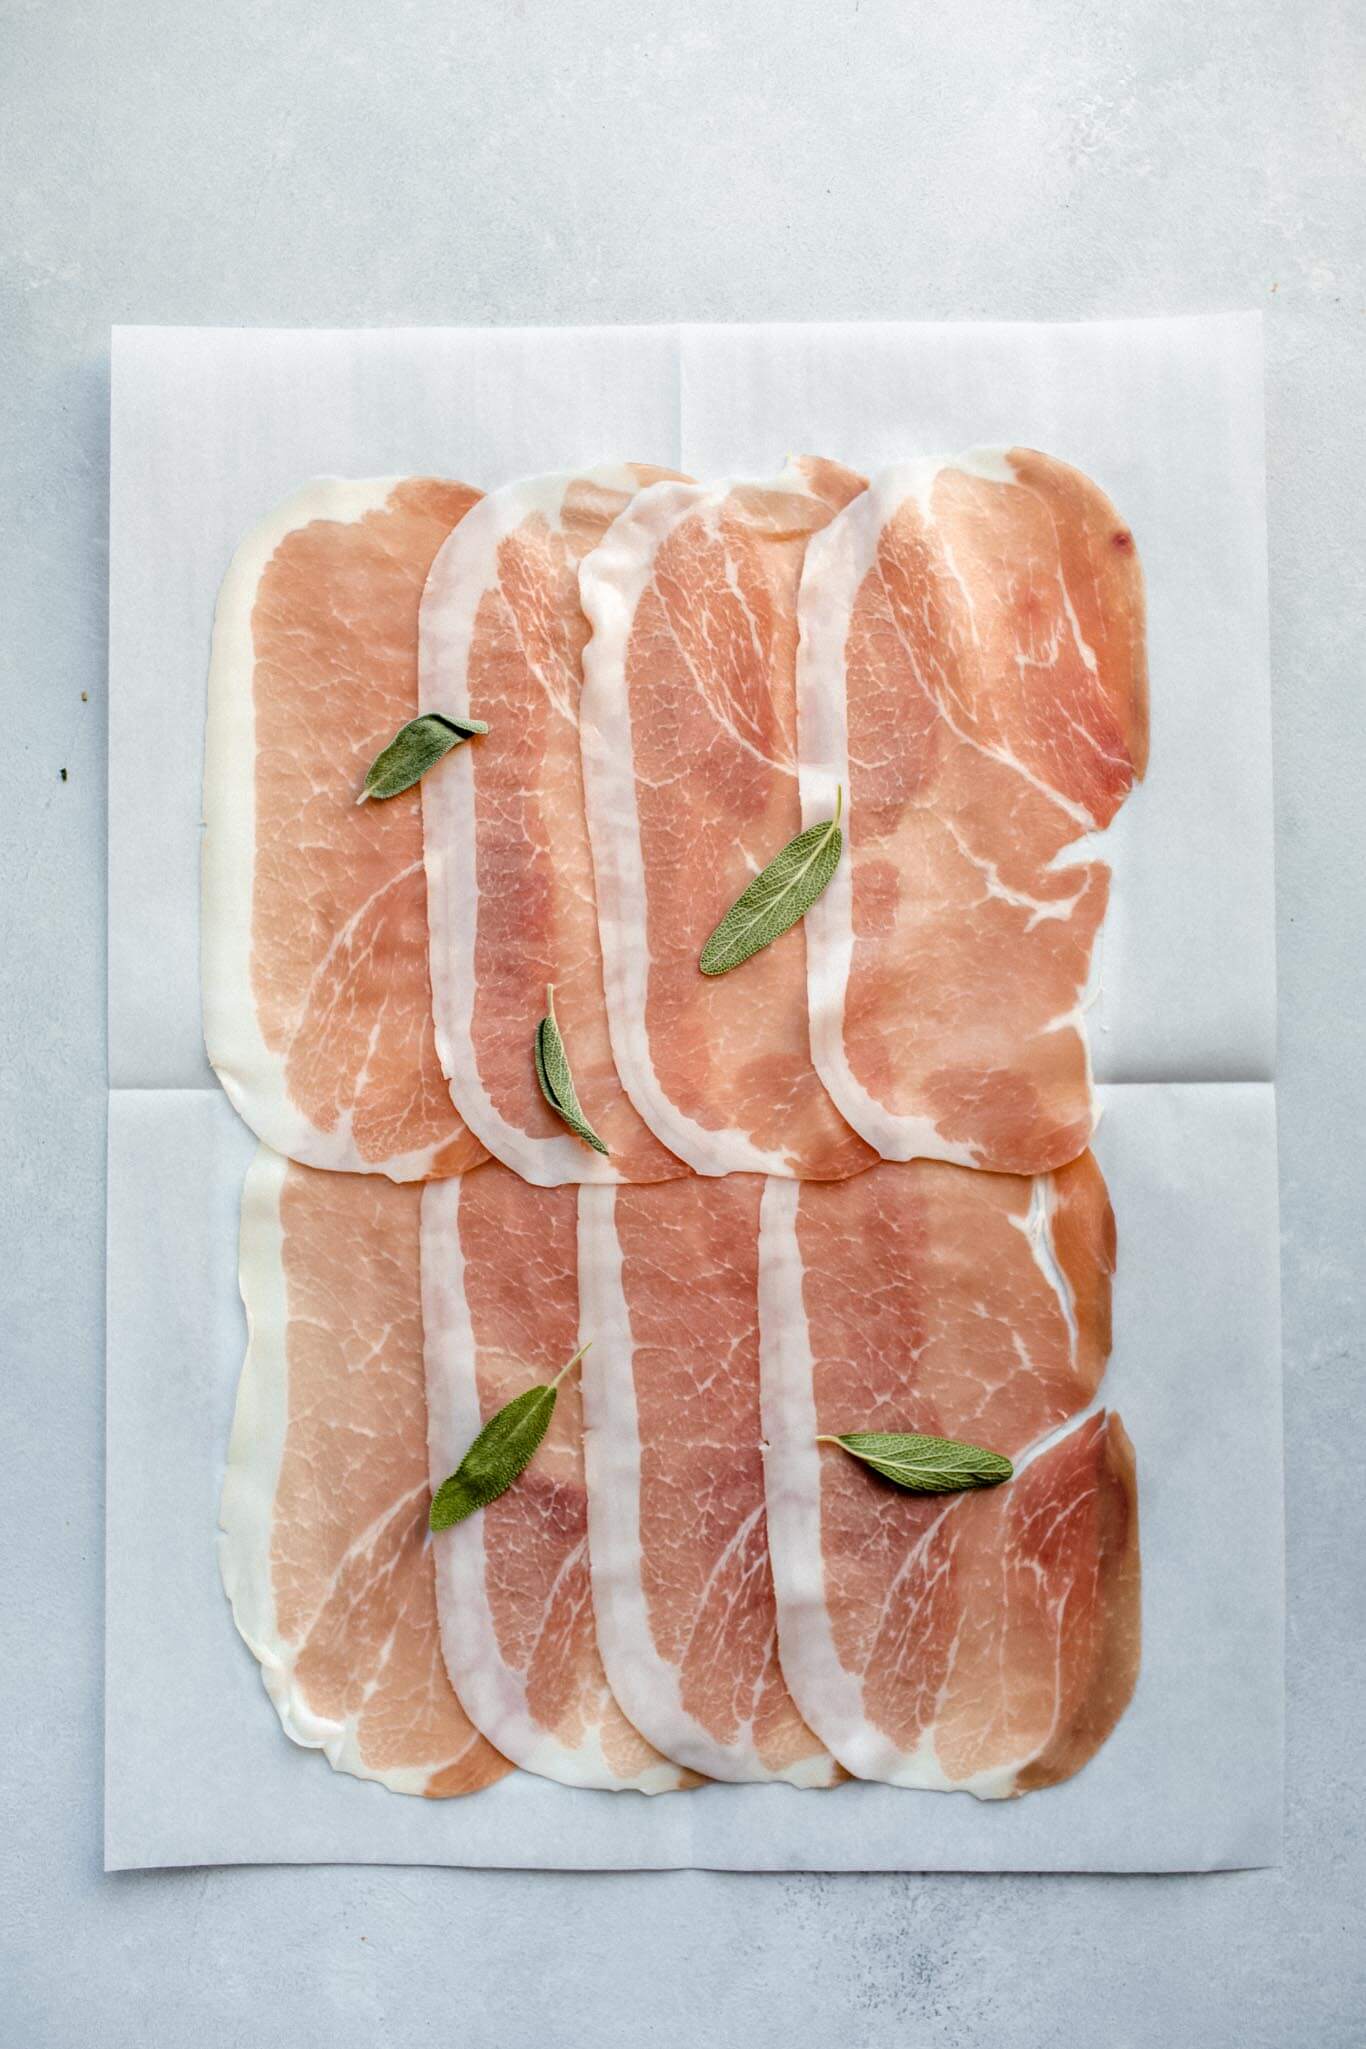 Prosciutto laid out in slices on parchment.